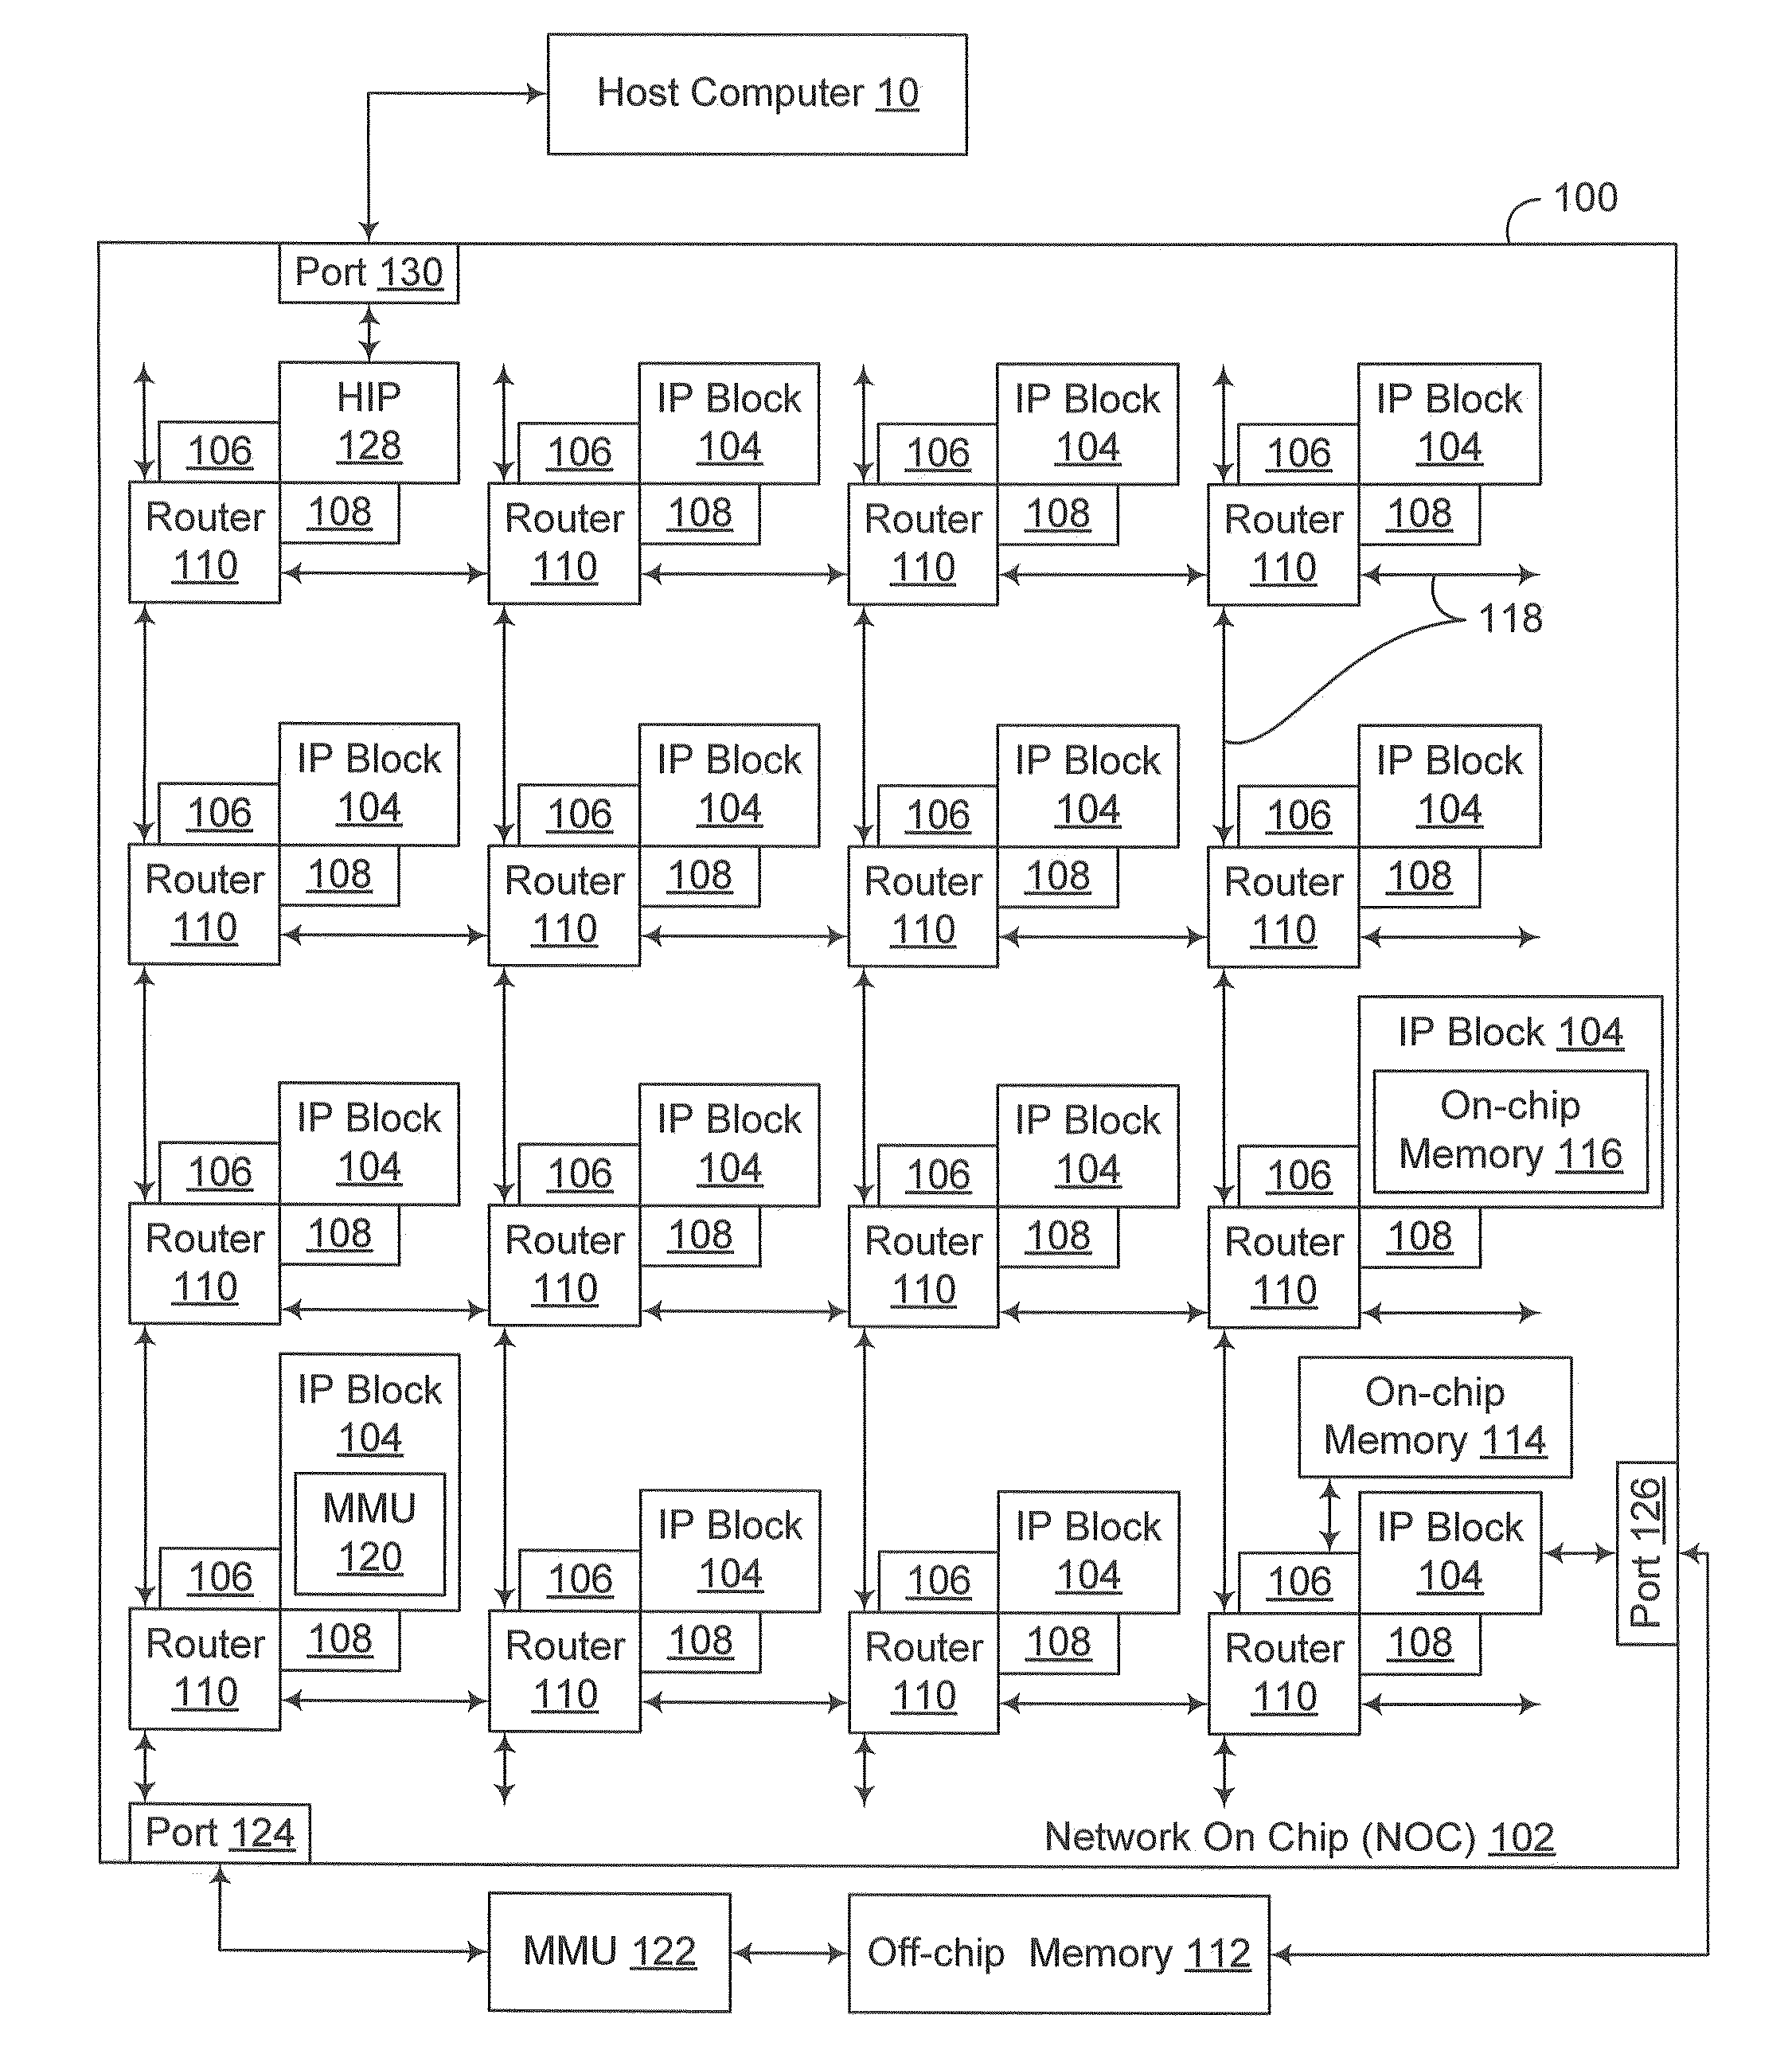 Vector register file caching of context data structure for maintaining state data in a multithreaded image processing pipeline